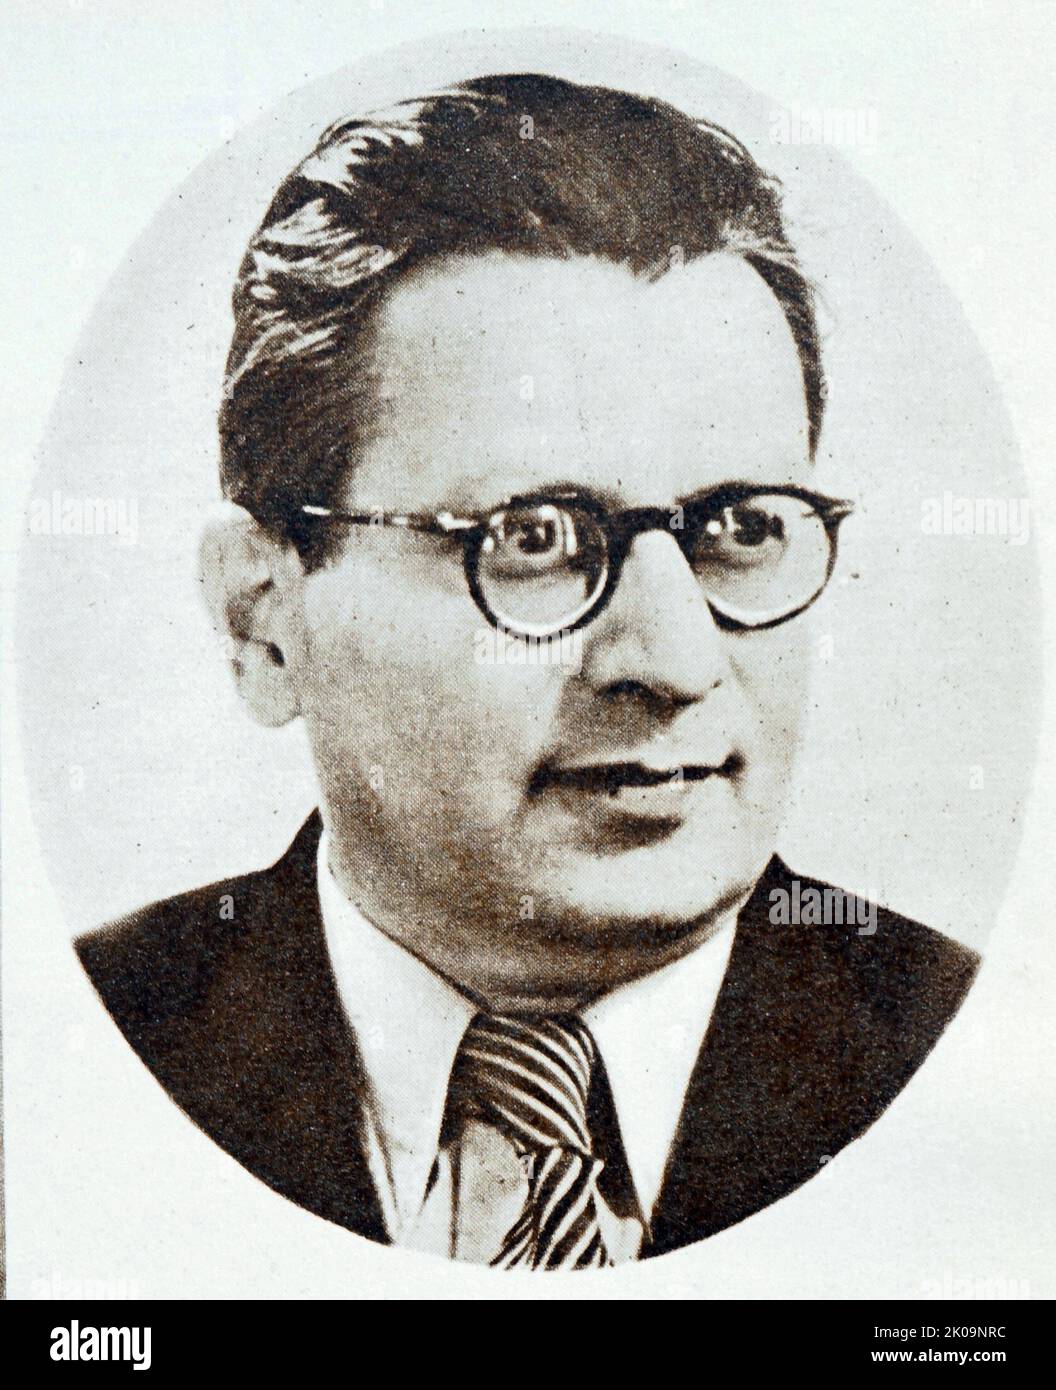 Traicho Kostov Djunev (17 June 1897, Sofia - 16 December 1949) was a Bulgarian politician, former President of the Council of Ministers and Secretary of the Central Committee of the Bulgarian Communist Party. Traicho Kostov, at the age of 52, was sentenced to death by the Bulgarian Supreme Court. He was tried together with ten others in Sofia from 7 December till 14 December 1949. Two days later he was executed. Kostov was the leading figure of the Bulgarian Communist Party. Stock Photo